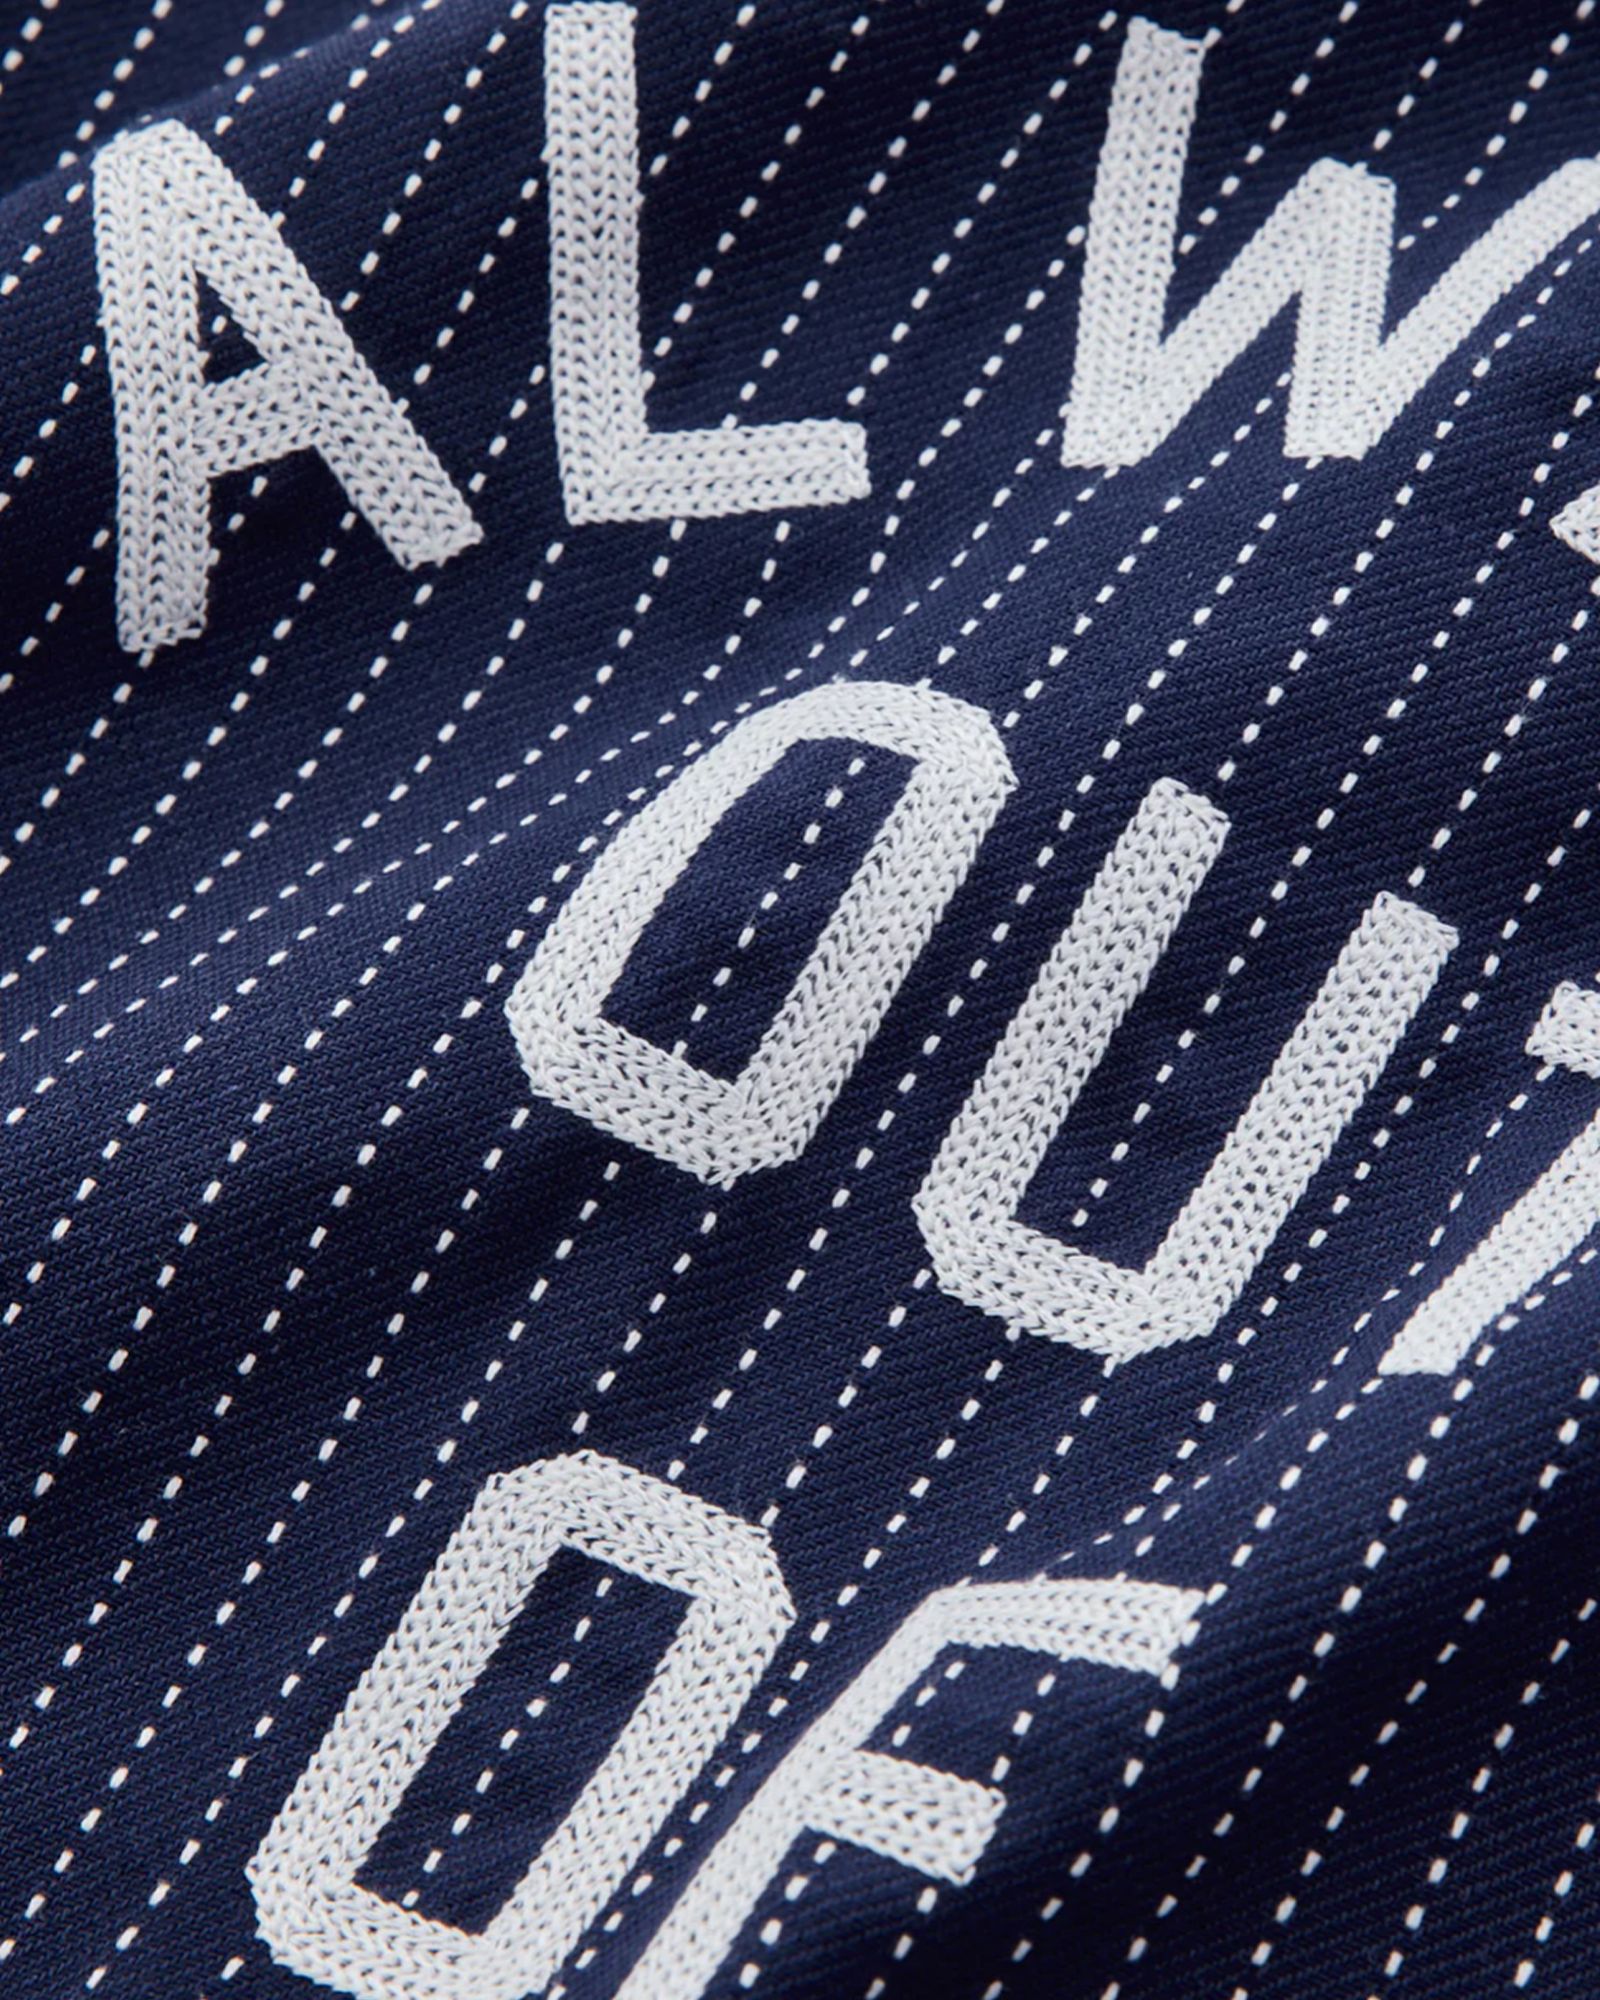 ALWAYS OUT OF STOCK - Classic basaball shirt | Detail